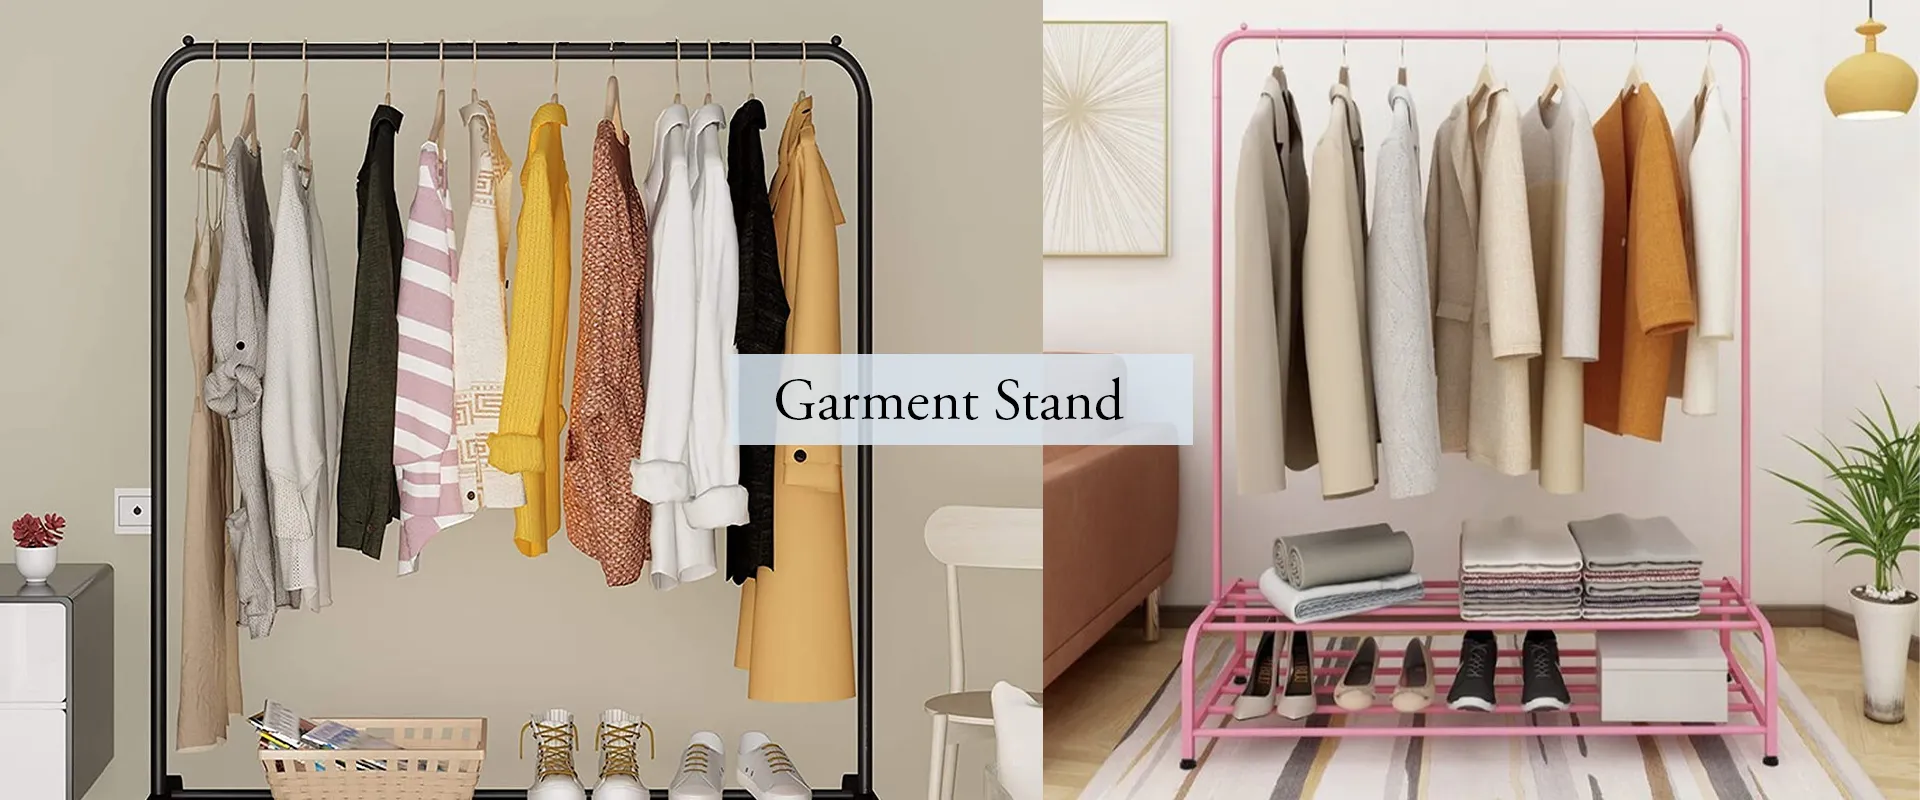 Garment Stand In Poali